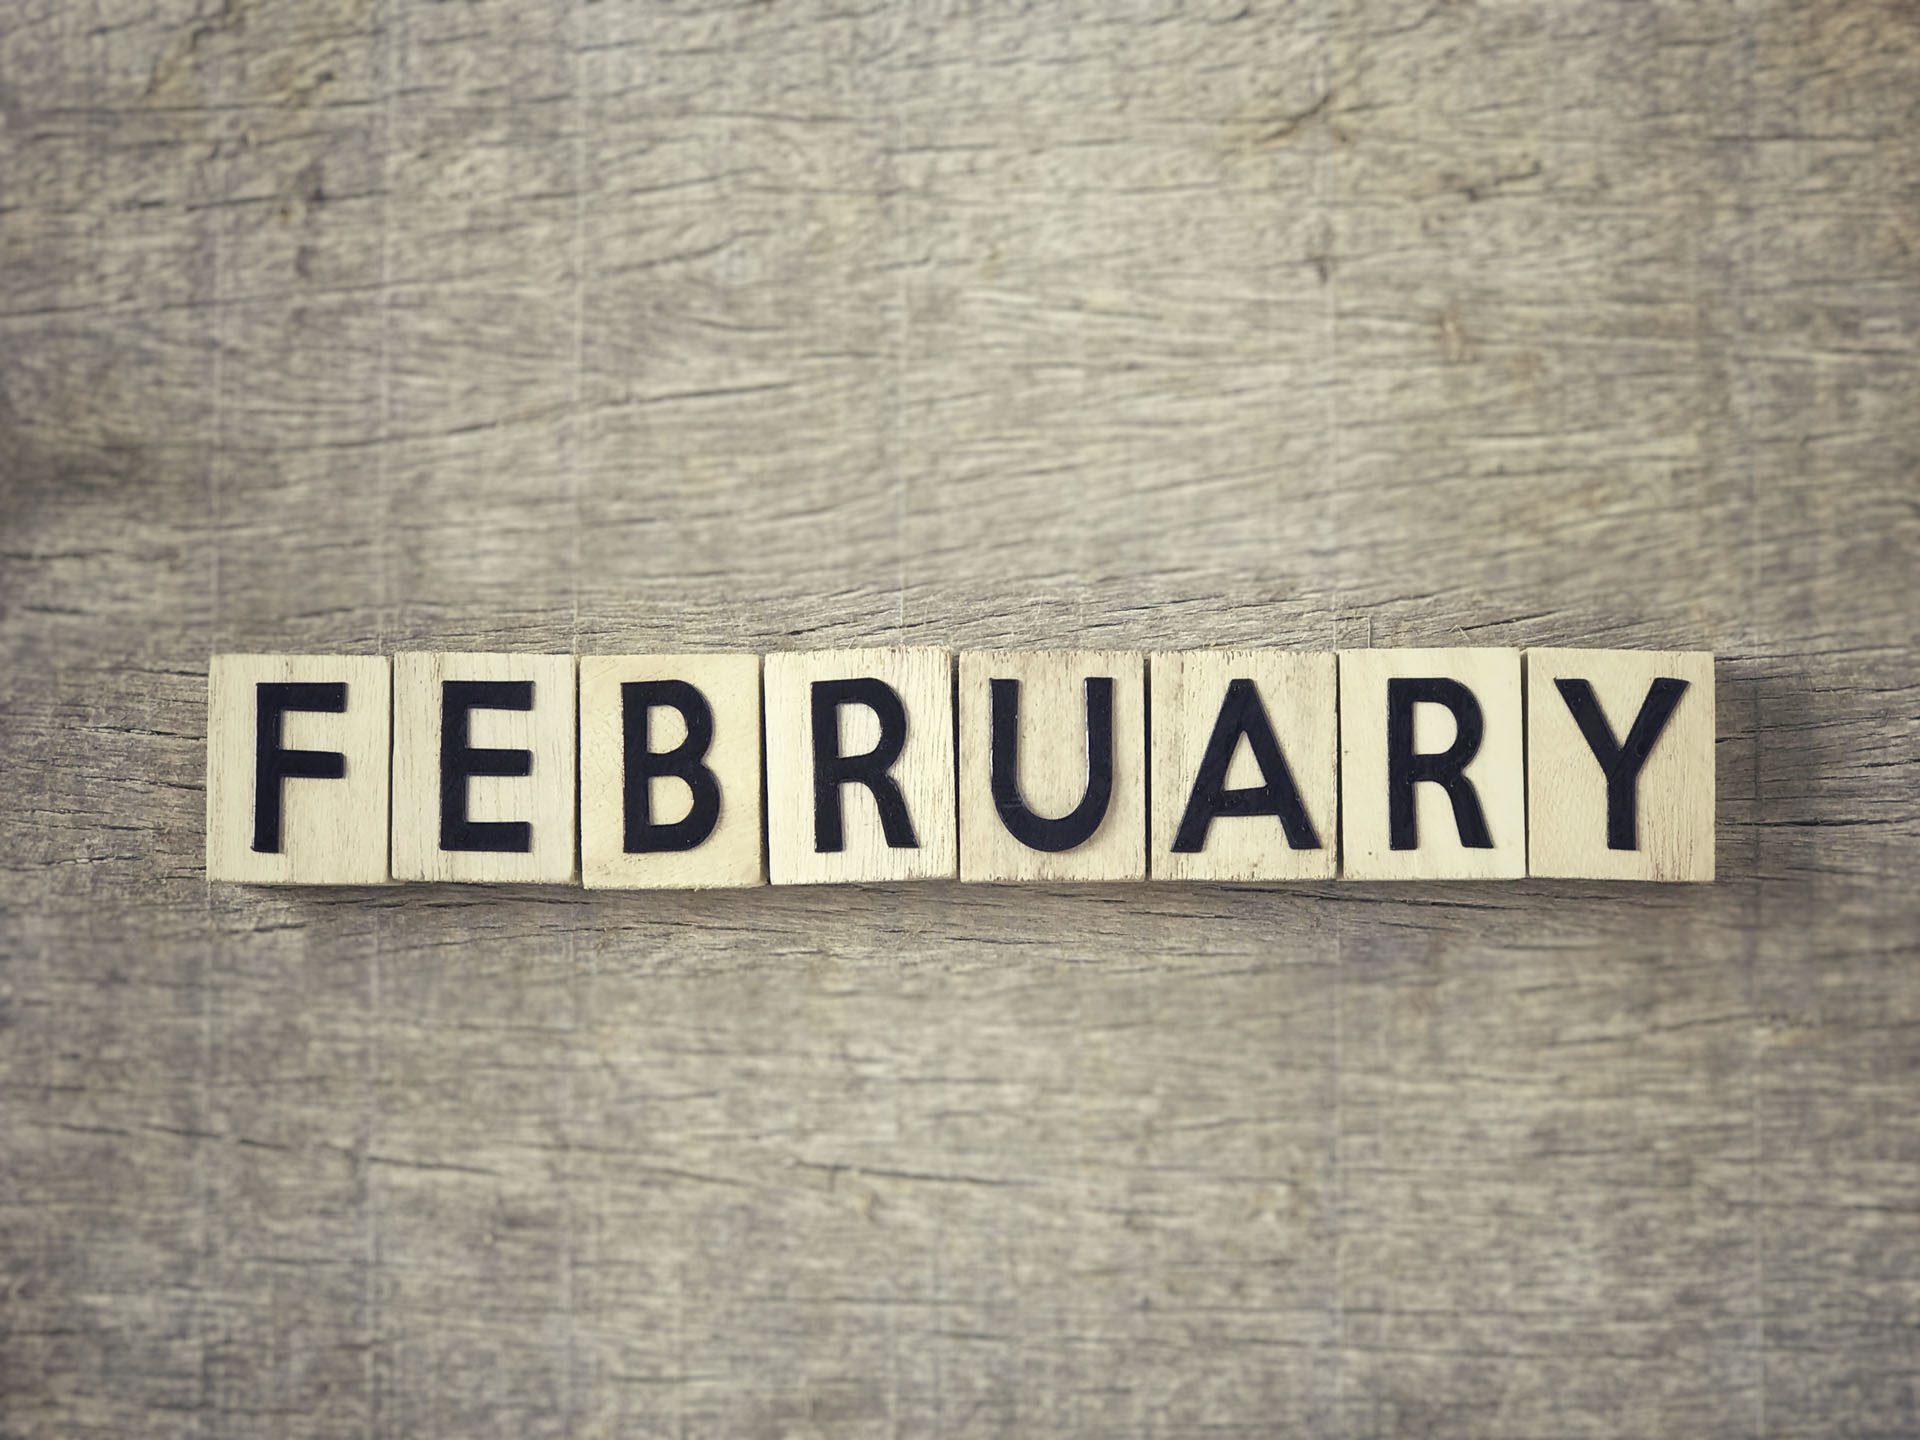 Motivational and inspirational word - ‘FEBRUARY’ written on wooden blocks and arranged on a wooden table.